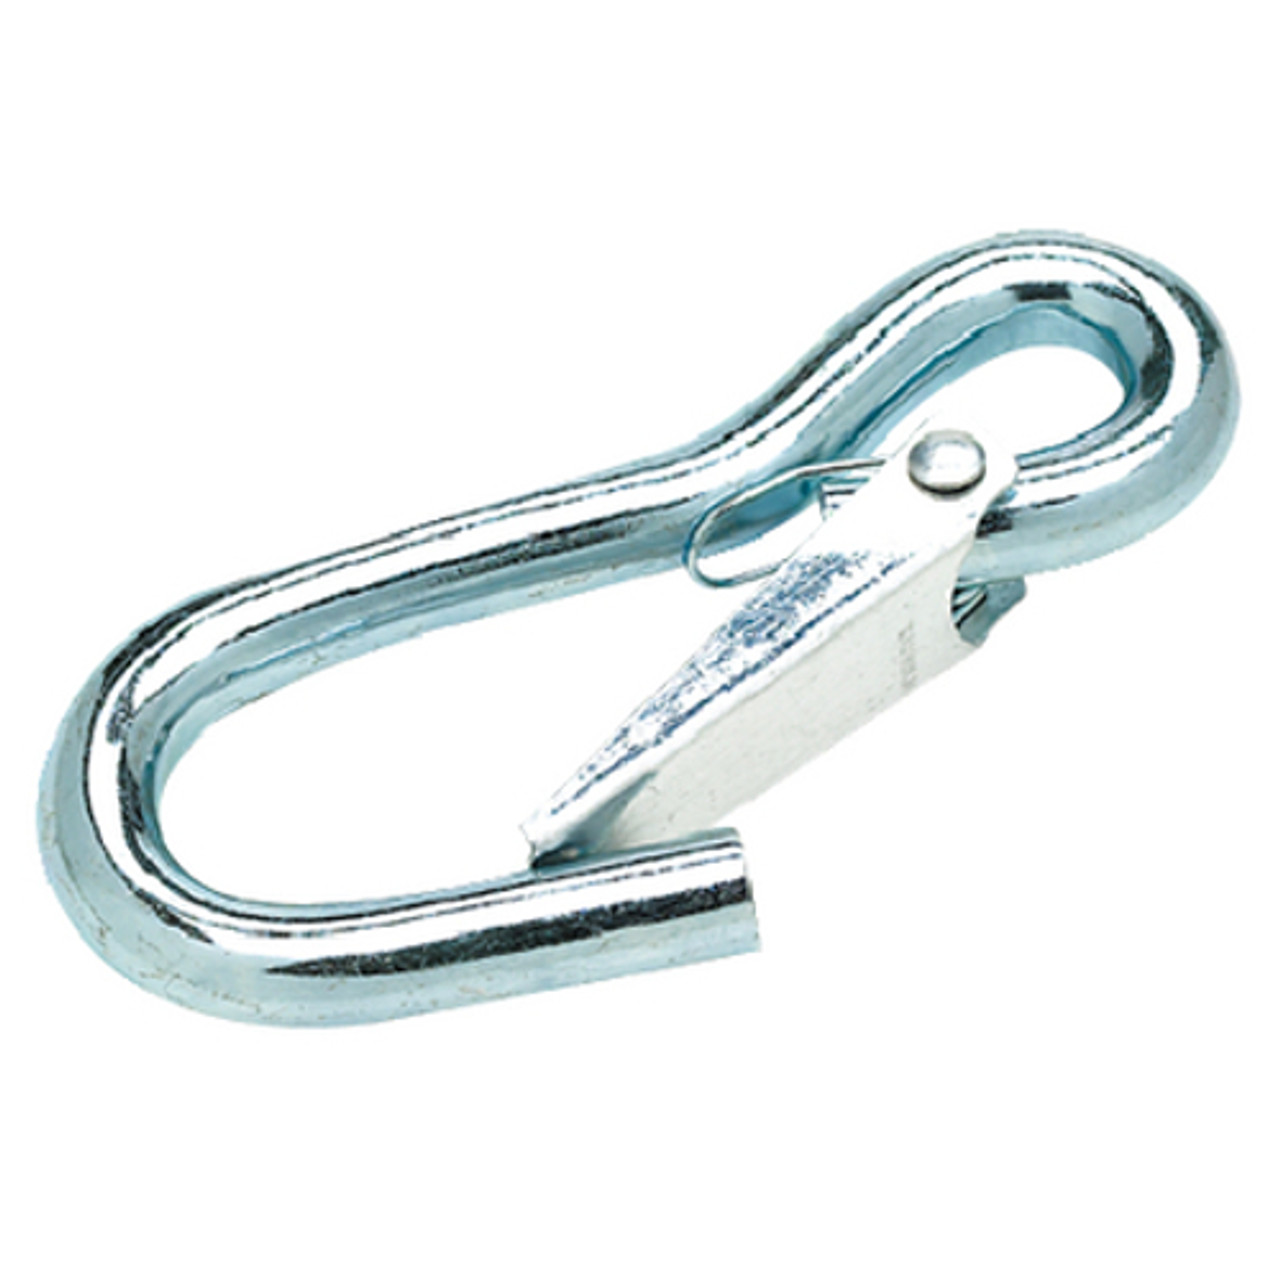 4-1/4 Inch Zinc Plated Utility Snap Hook for Boats, RVs and More